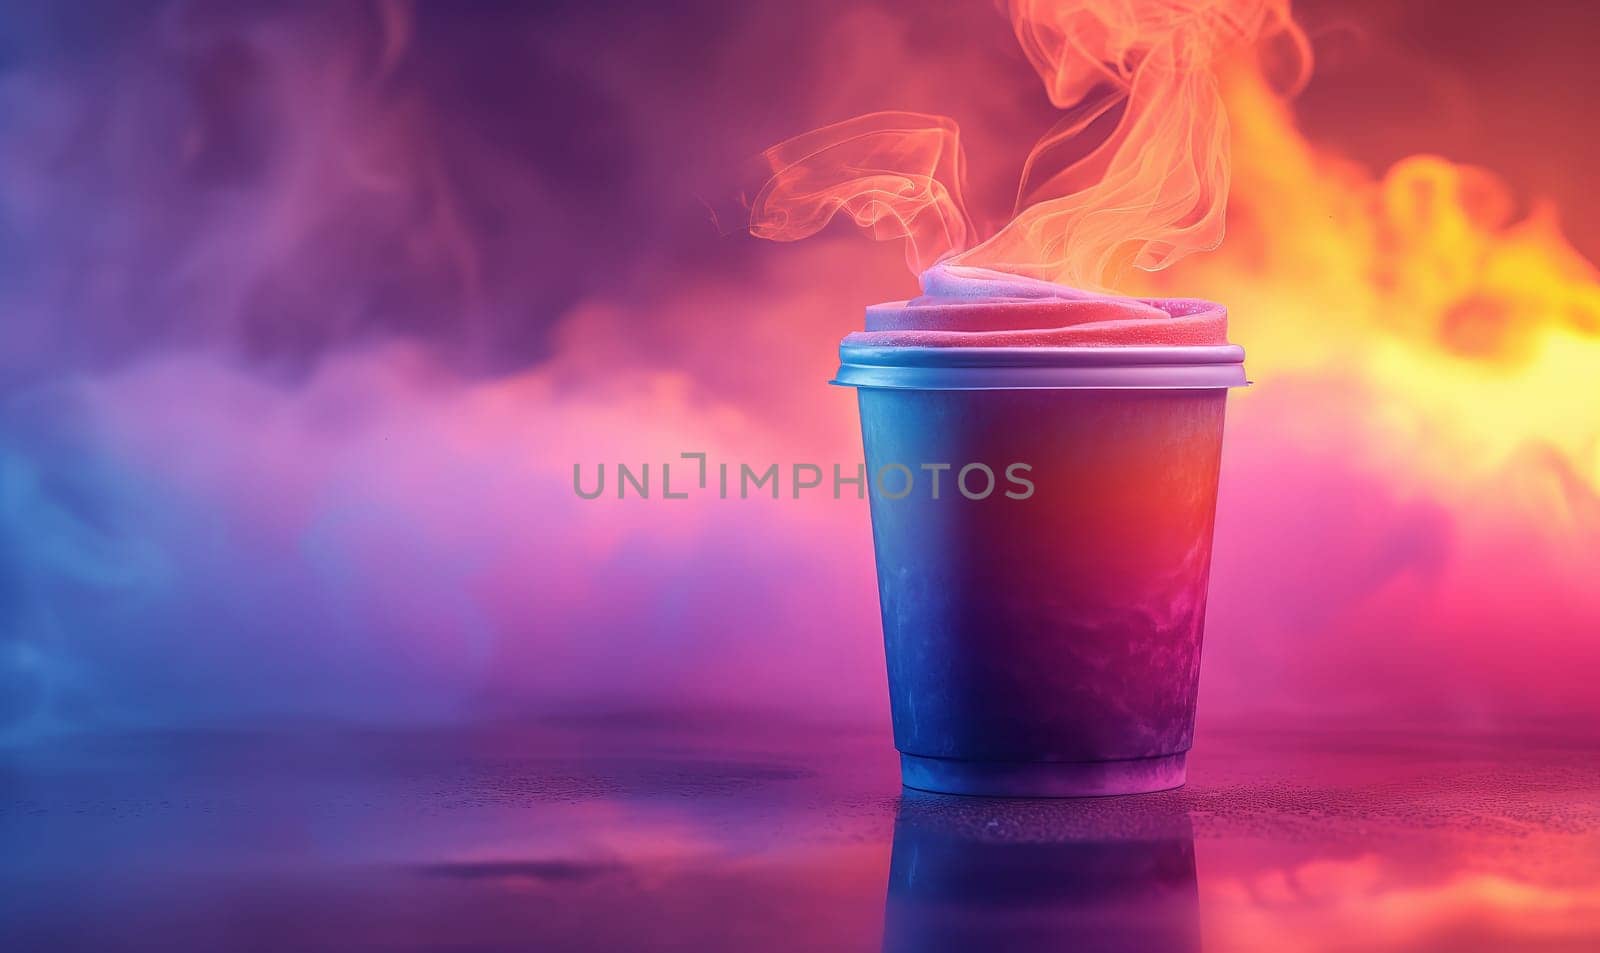 Drink cup with lid on abstract background. by Fischeron